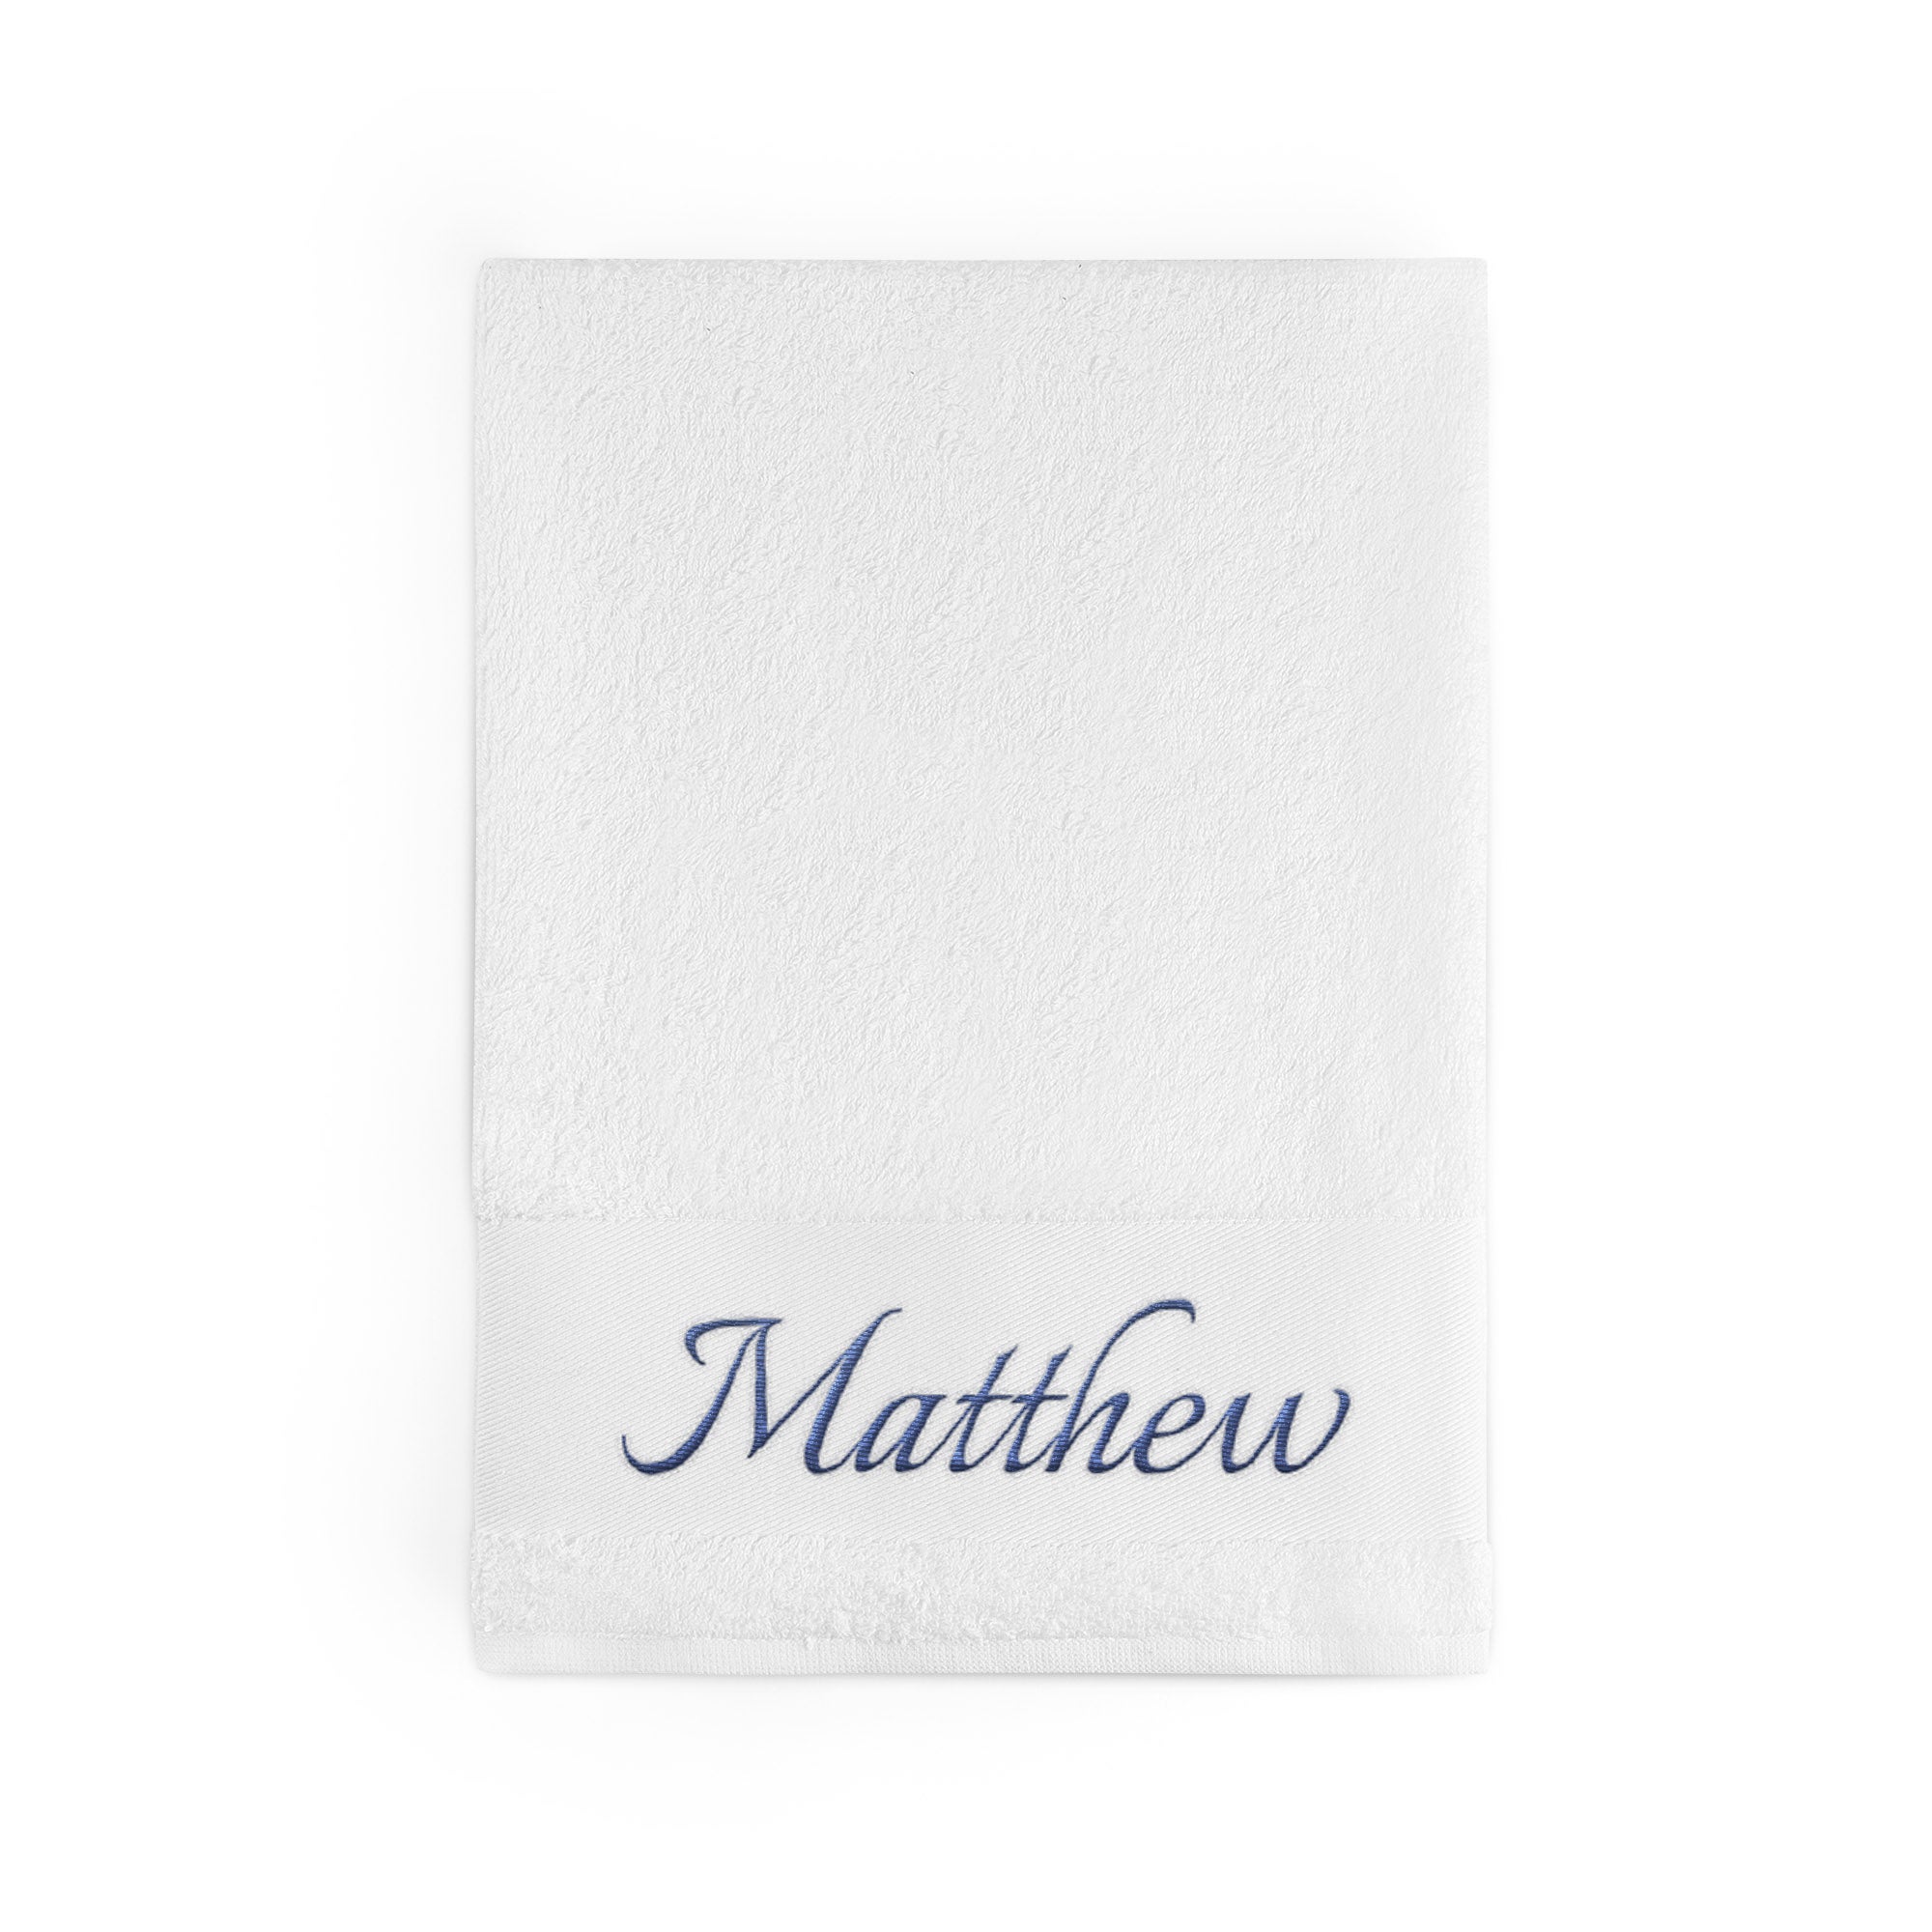 Personalised beach towel - Embroidered - White - 70 x 140 cm